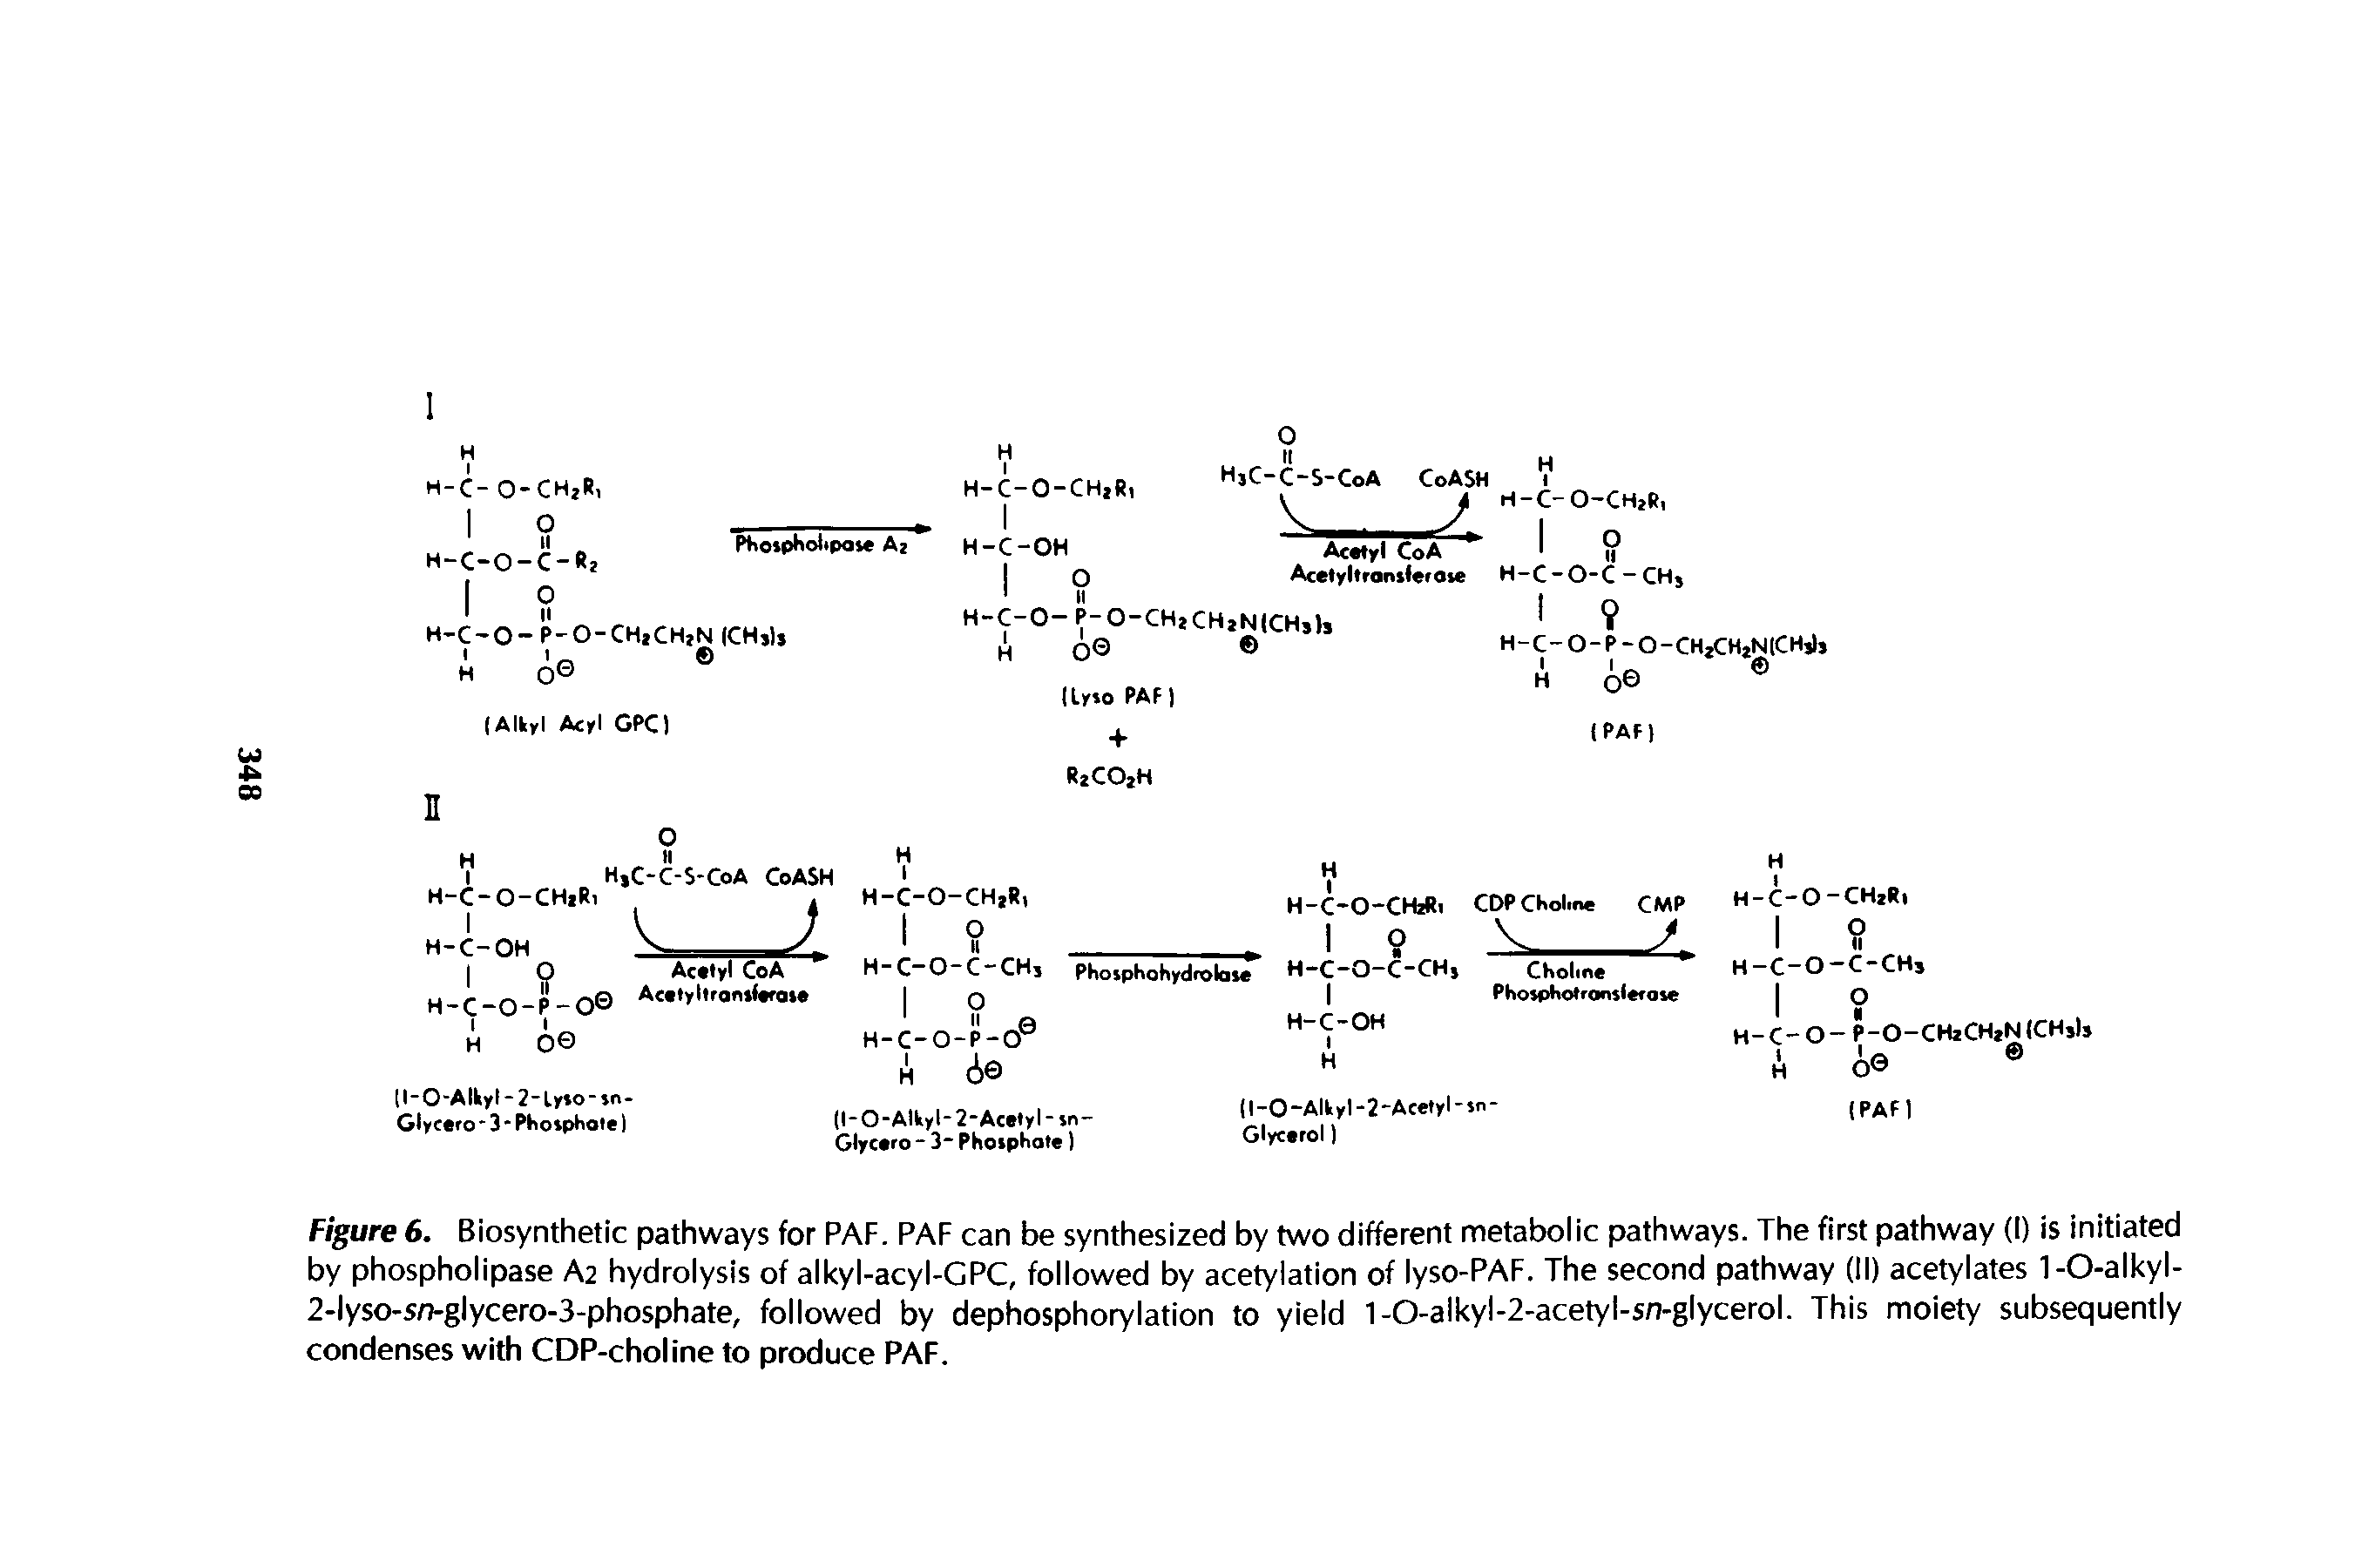 Figure 6. Biosynthetic pathways for PAF. PAF can be synthesized by two different metabolic pathways. The first pathway (I) is initiated by phospholipase A2 hydrolysis of alkyl-acyl-GPC, followed by acetylation of lyso-PAF. The second pathway (II) acetylates 1-O-alkyl-2- yso-sn-g Ycero-3-phosphate, followed by dephosphorylation to yield 1-0-alkyl-2-acetyl-s/7-glycerol. This moiety subsequently condenses with CDP-choline to produce PAF.